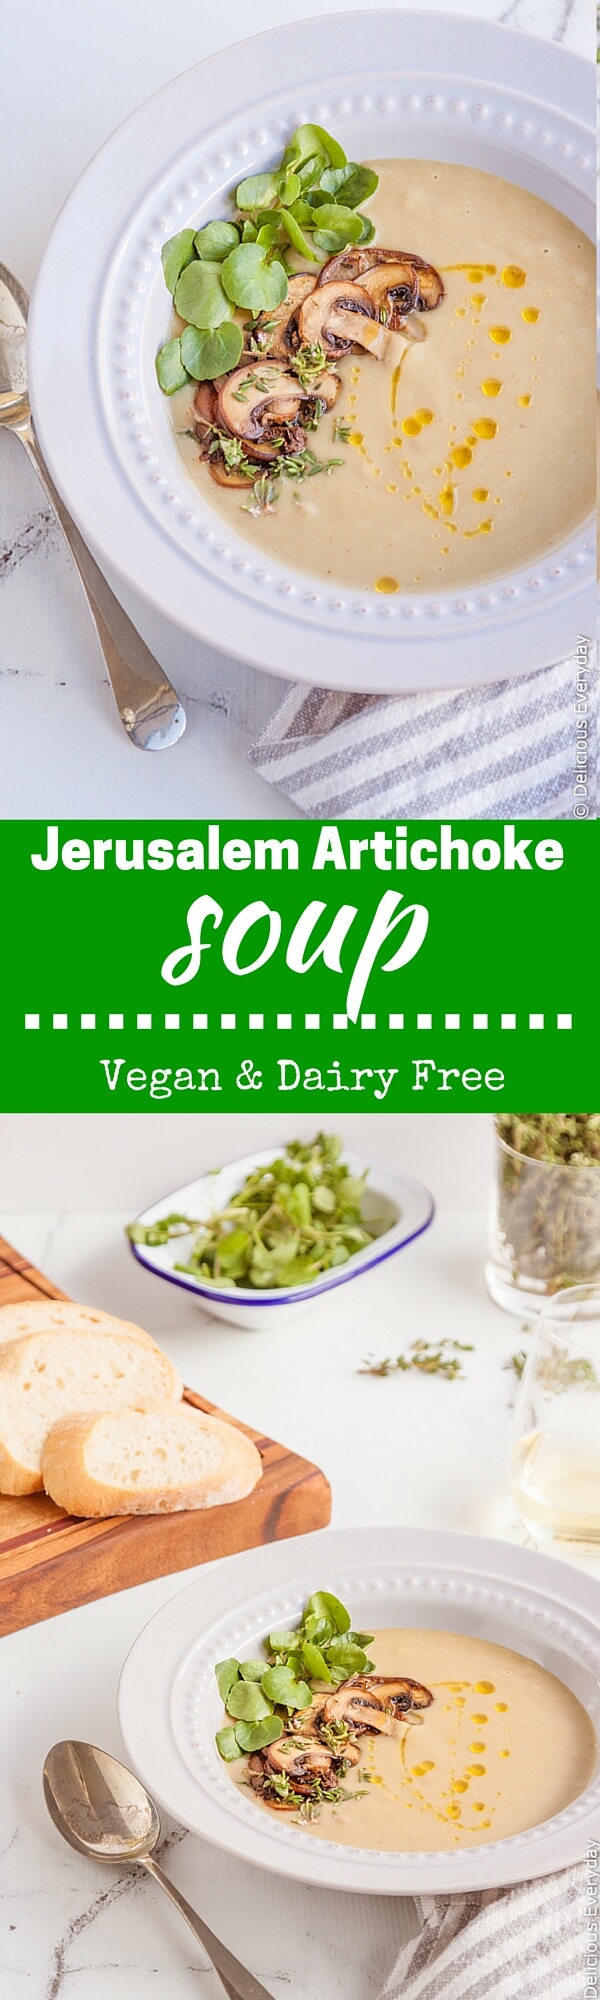 Get the recipe for this delicious vegan Jerusalem Artichoke Soup with Mushrooms and Watercress. | Find the recipe at DeliciousEveryday.com